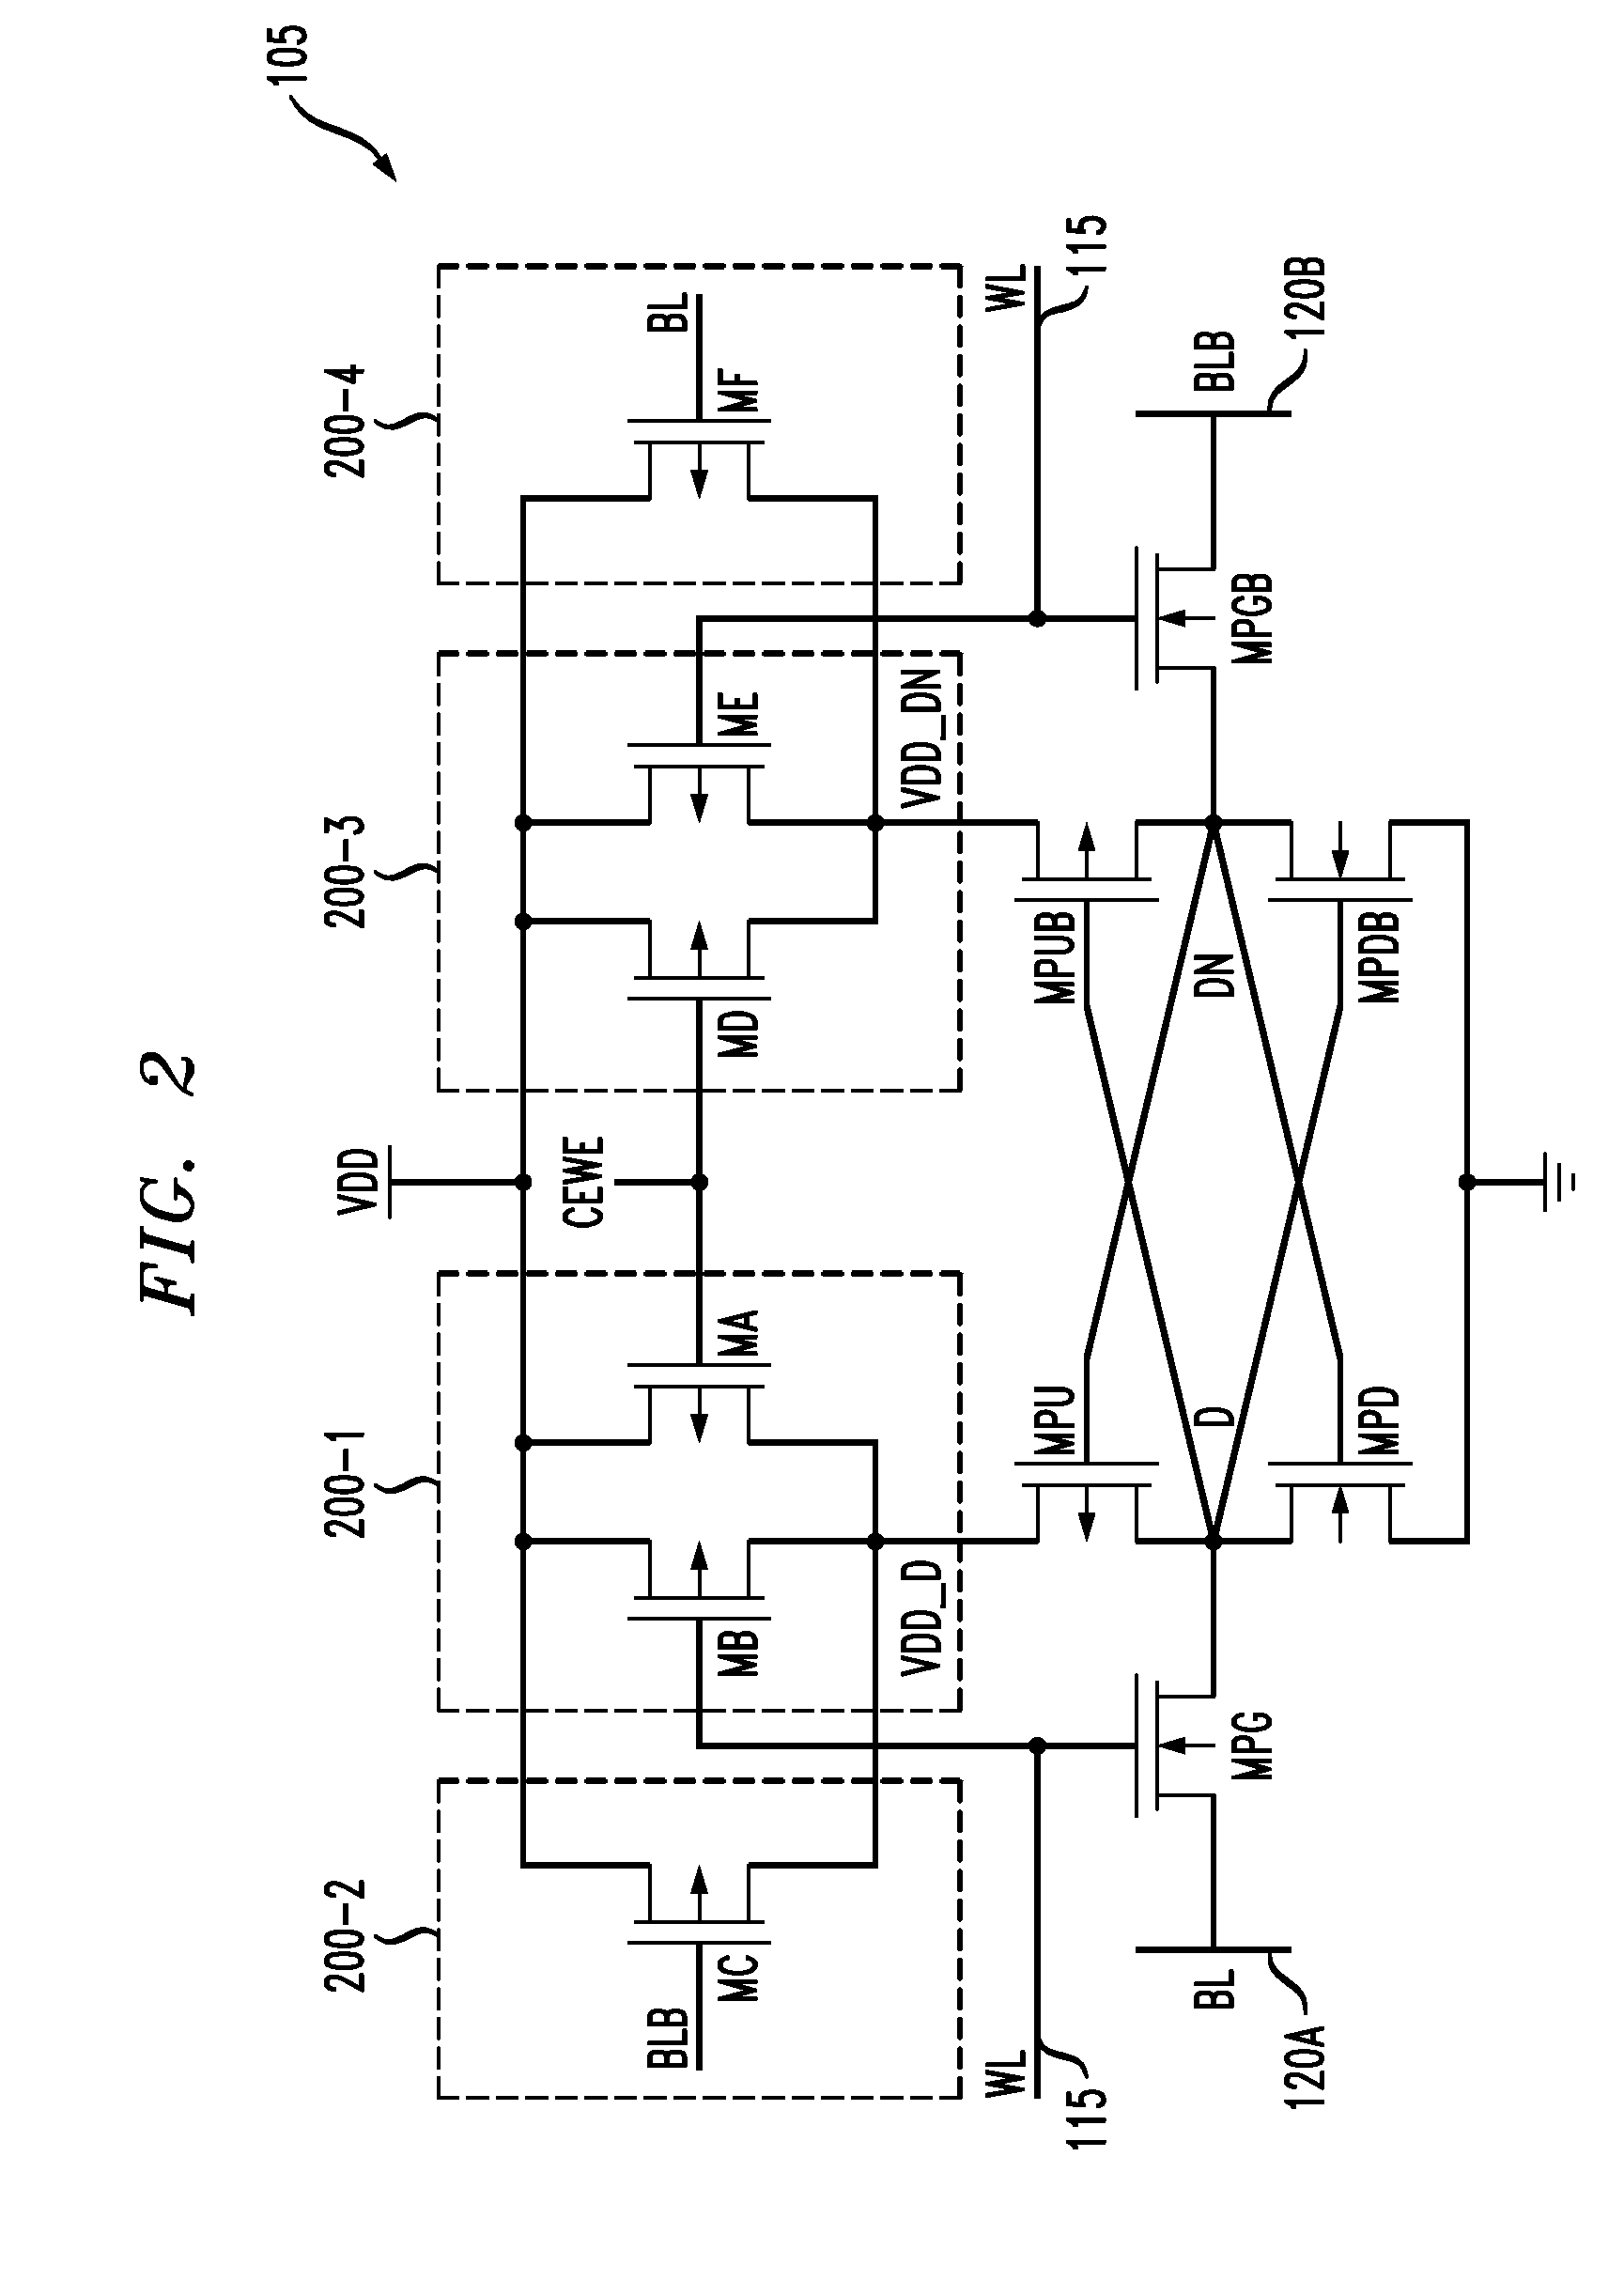 Memory Device Having Memory Cells with Enhanced Low Voltage Write Capability